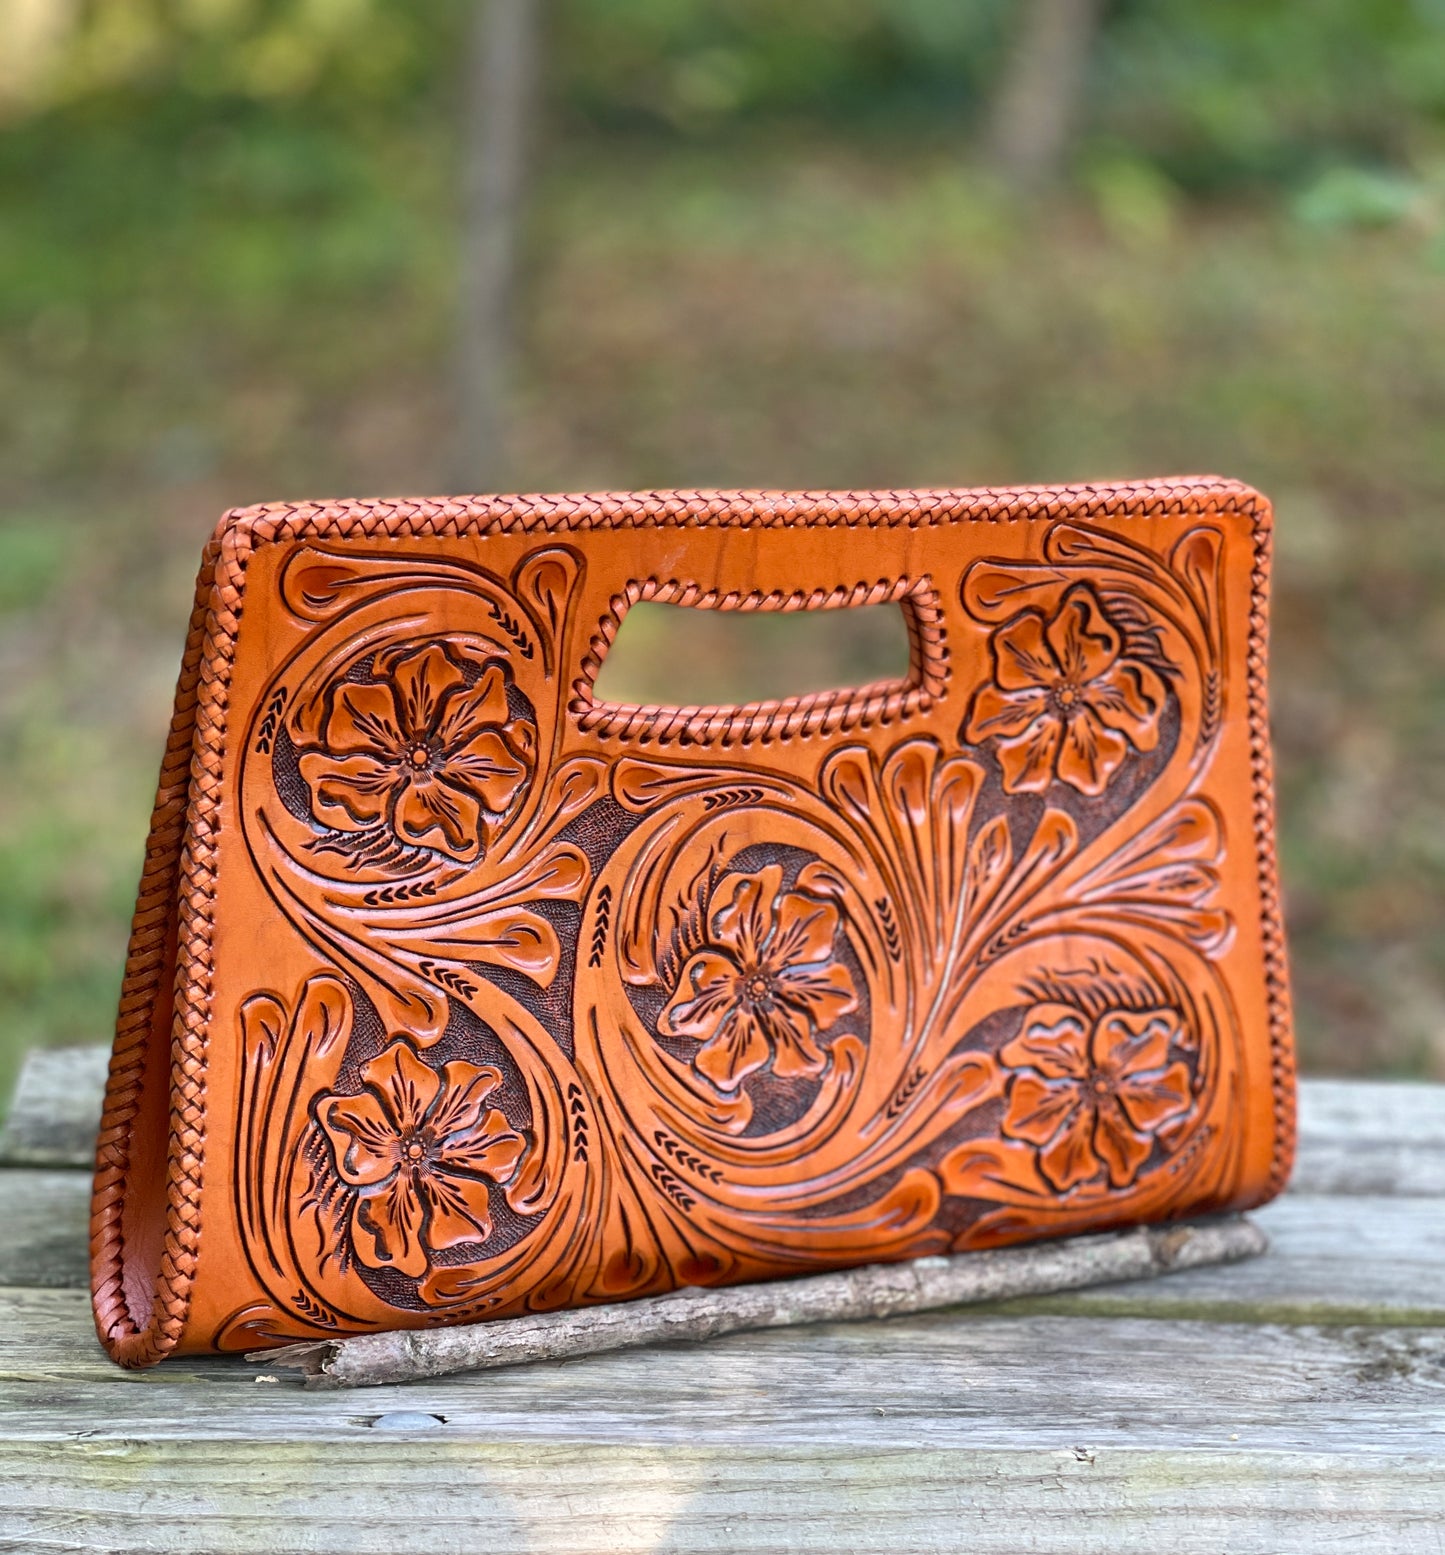 Hand-Tooled Leather Large Clutch, "YENNY" by ALLE - ALLE Handbags